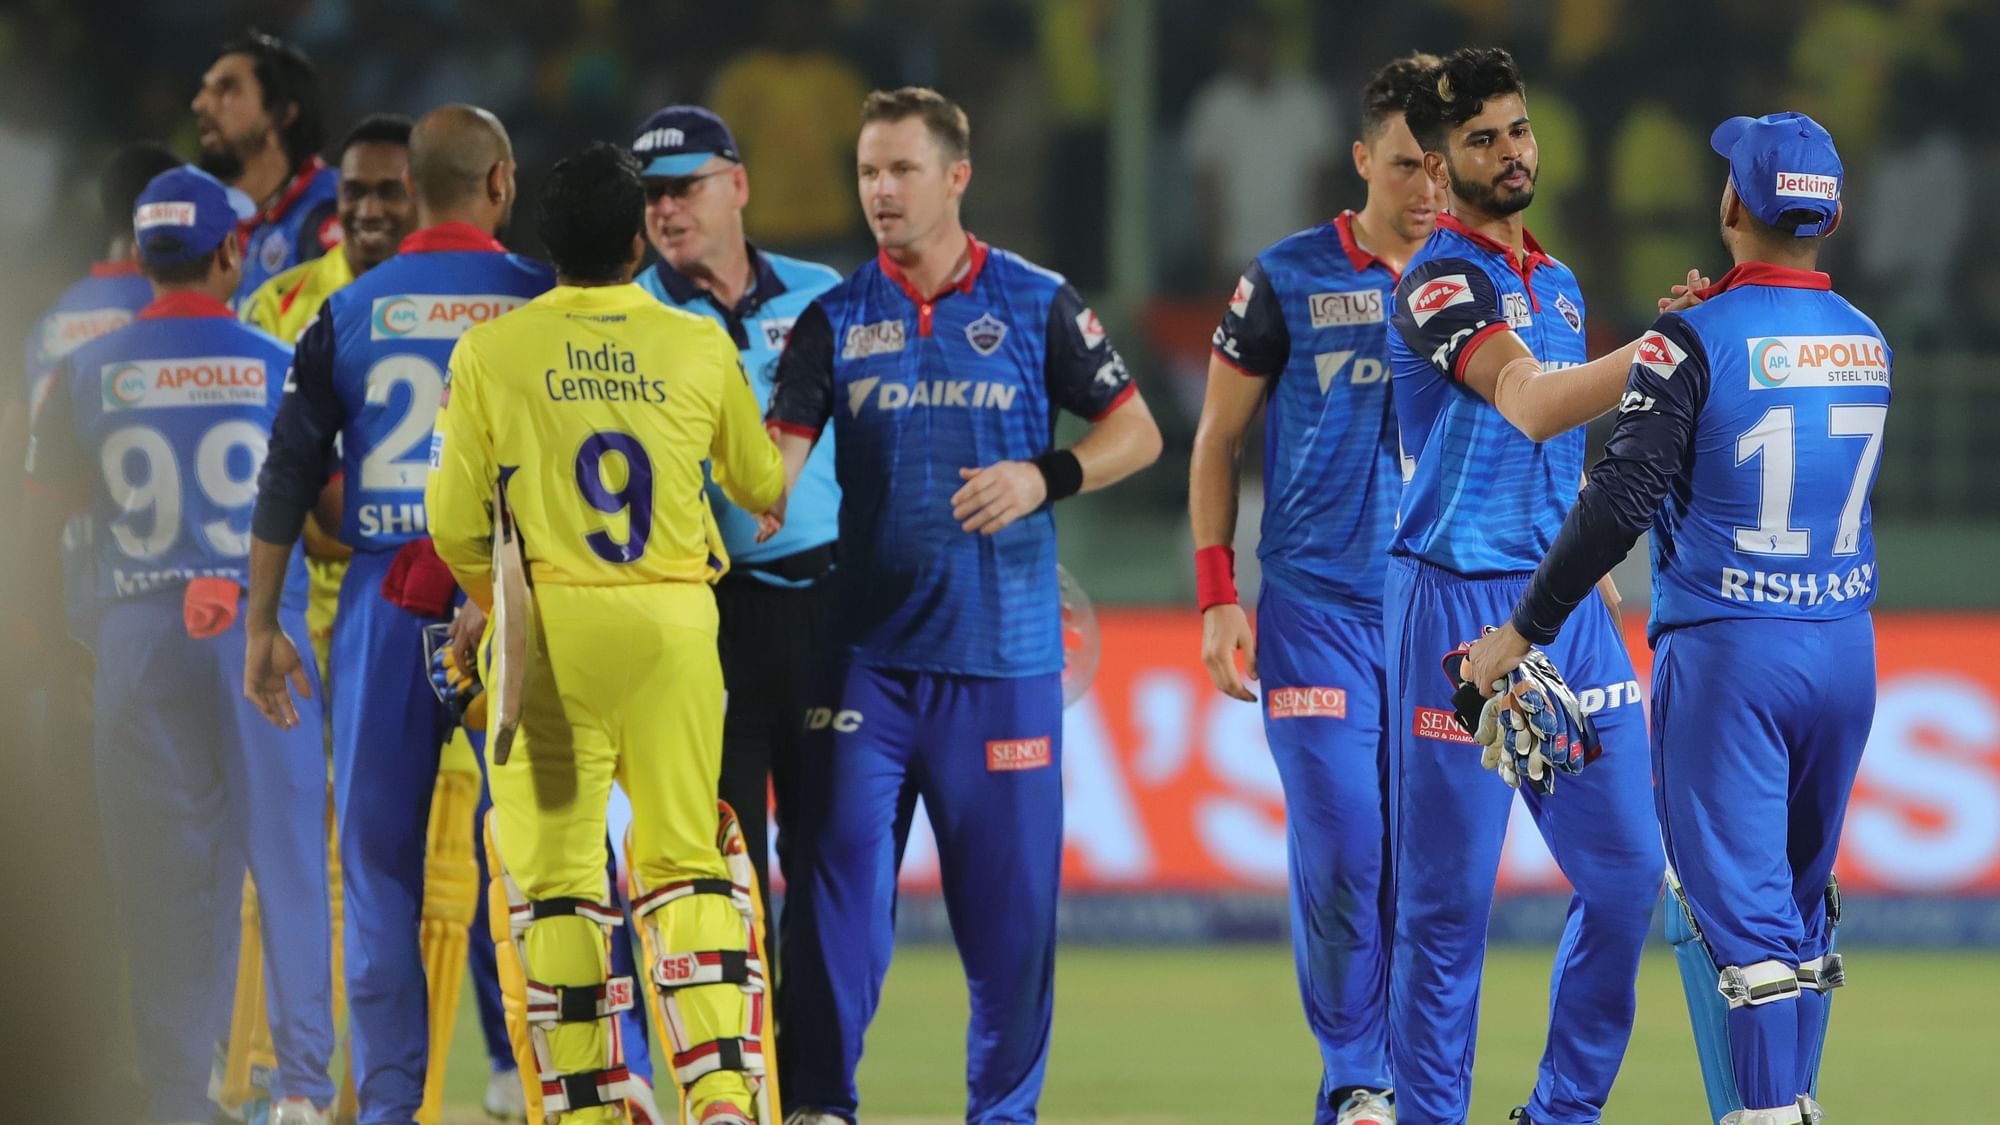 After being asked to bat first, DC posted a target of 148 for CSK, which the latter chased with six wickets in hand.